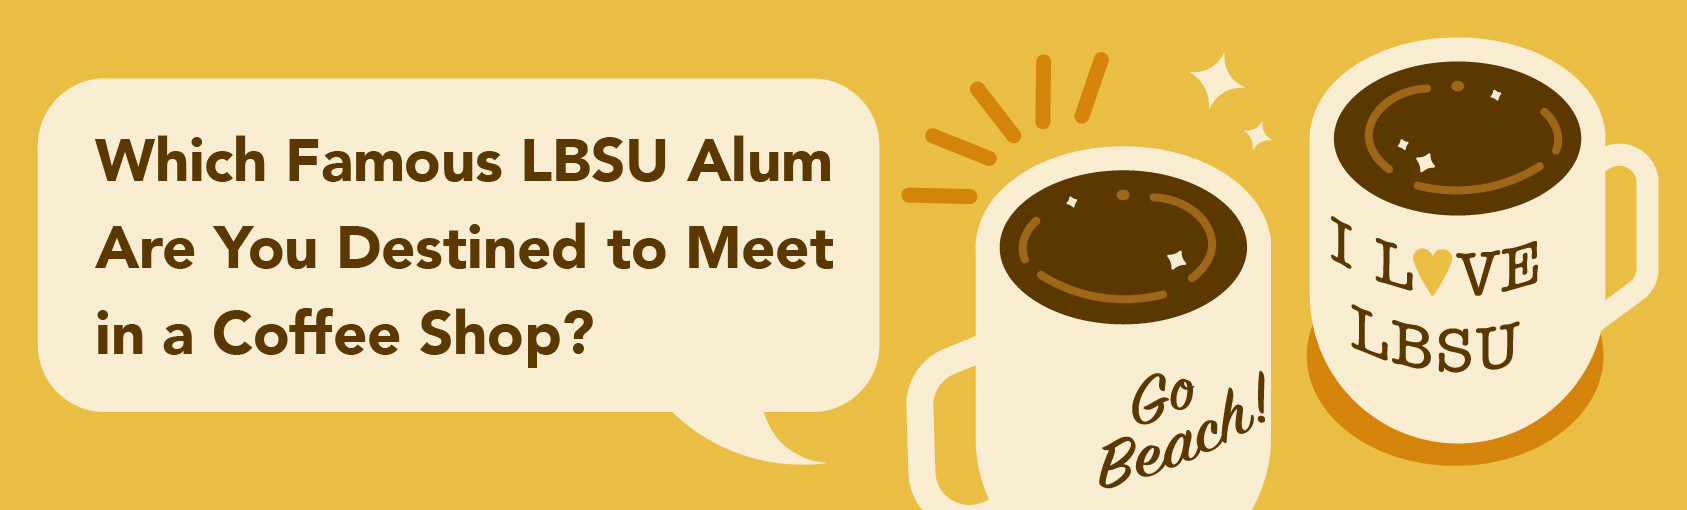 Quiz: Which Famous LBSU Alum Are You Destined to Meet in a Coffee Shop? banner